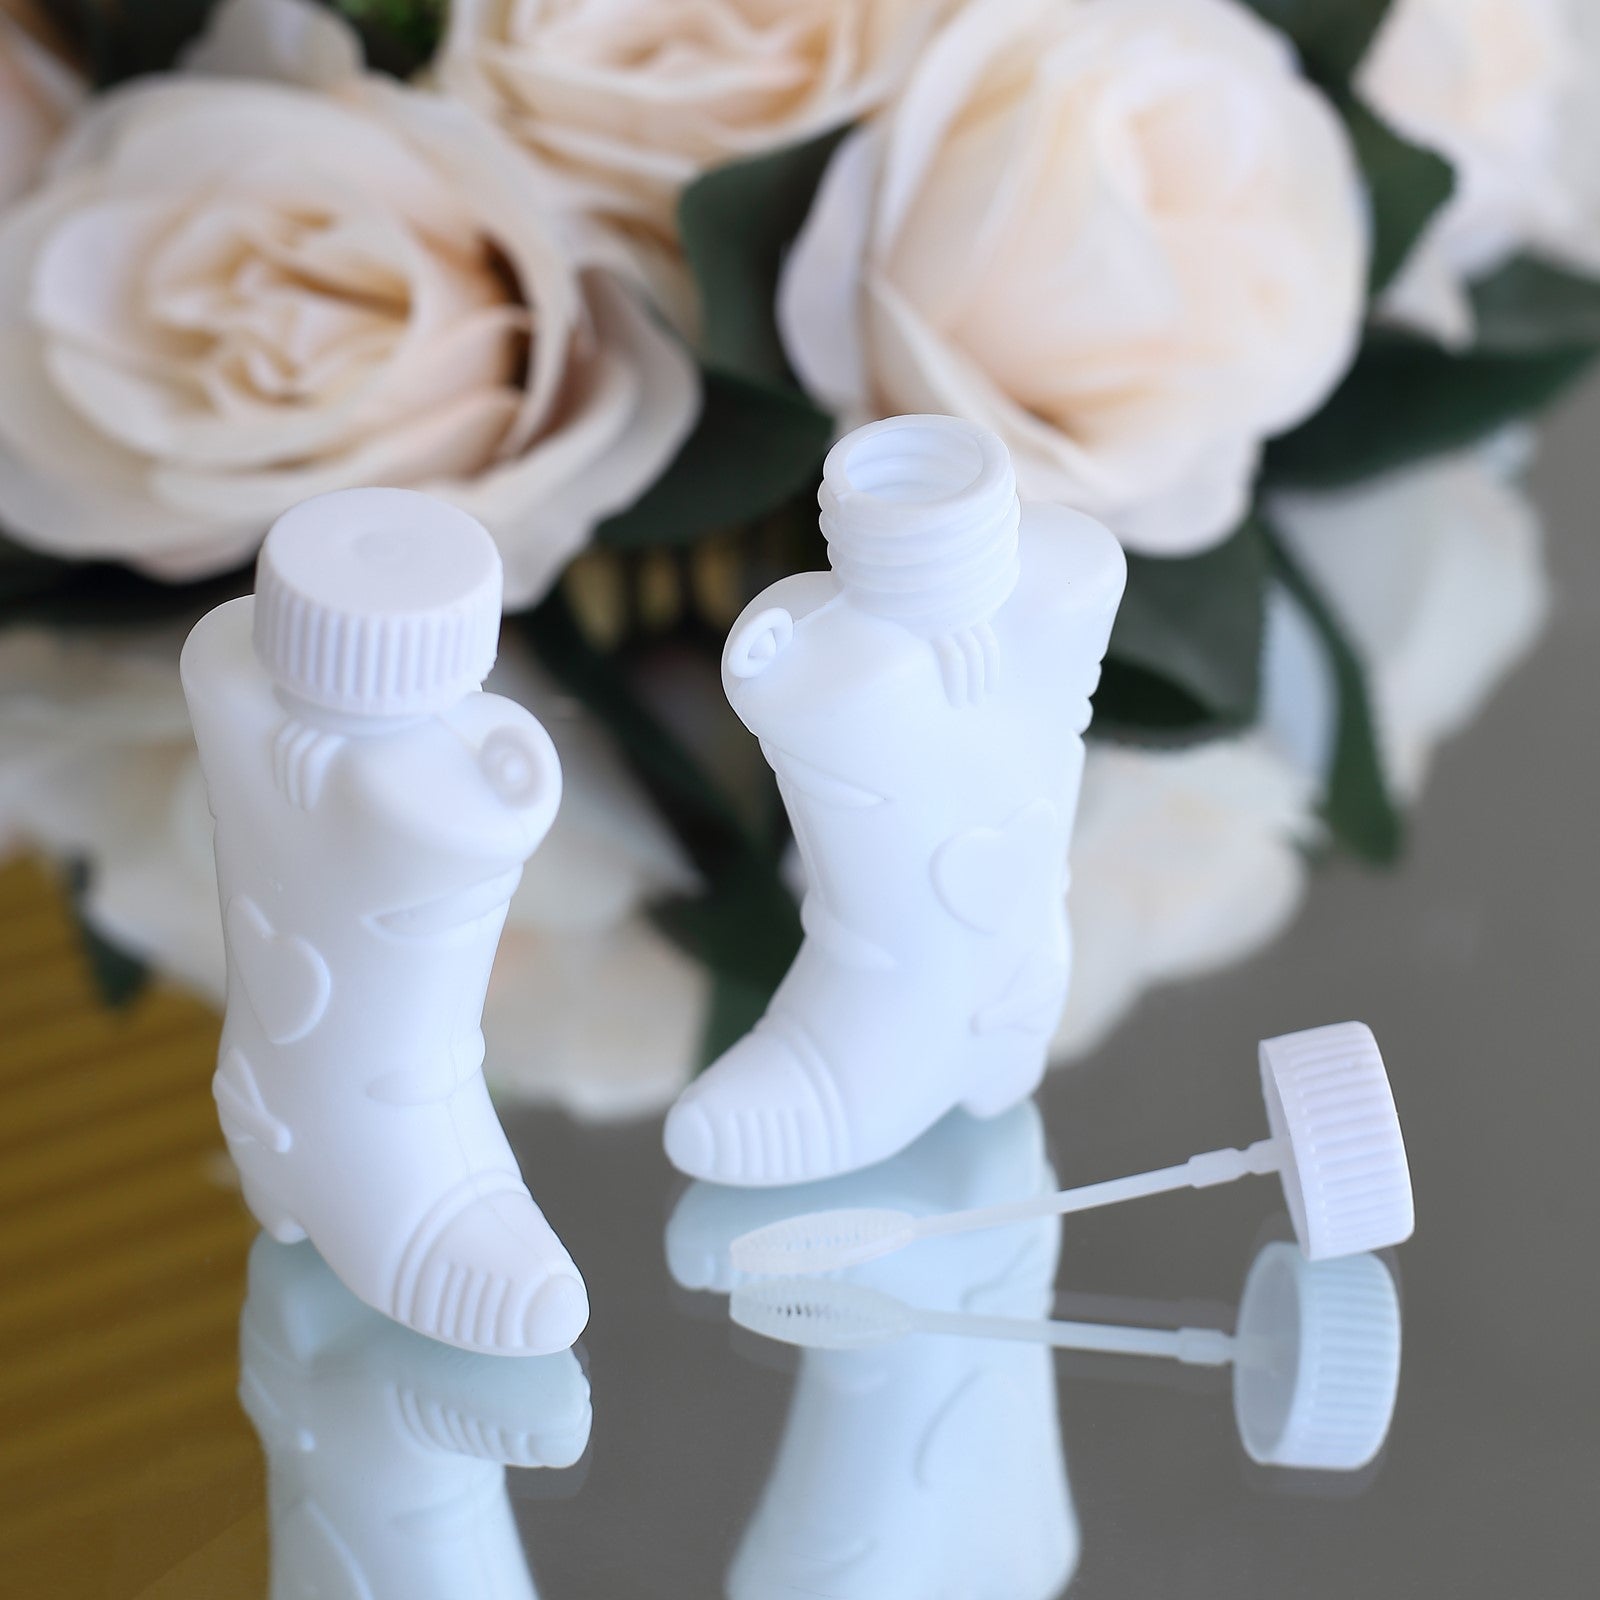 Efavormart Wholesale 24 pack White Cowboy Boot Bubbles Wedding Bridal Favor  for Wedding, Anniversary, Engagement, Bridal, Celebration, Valentine’s Day, Family Reunion, and Gift for Couple Boy Girl - image 1 of 11